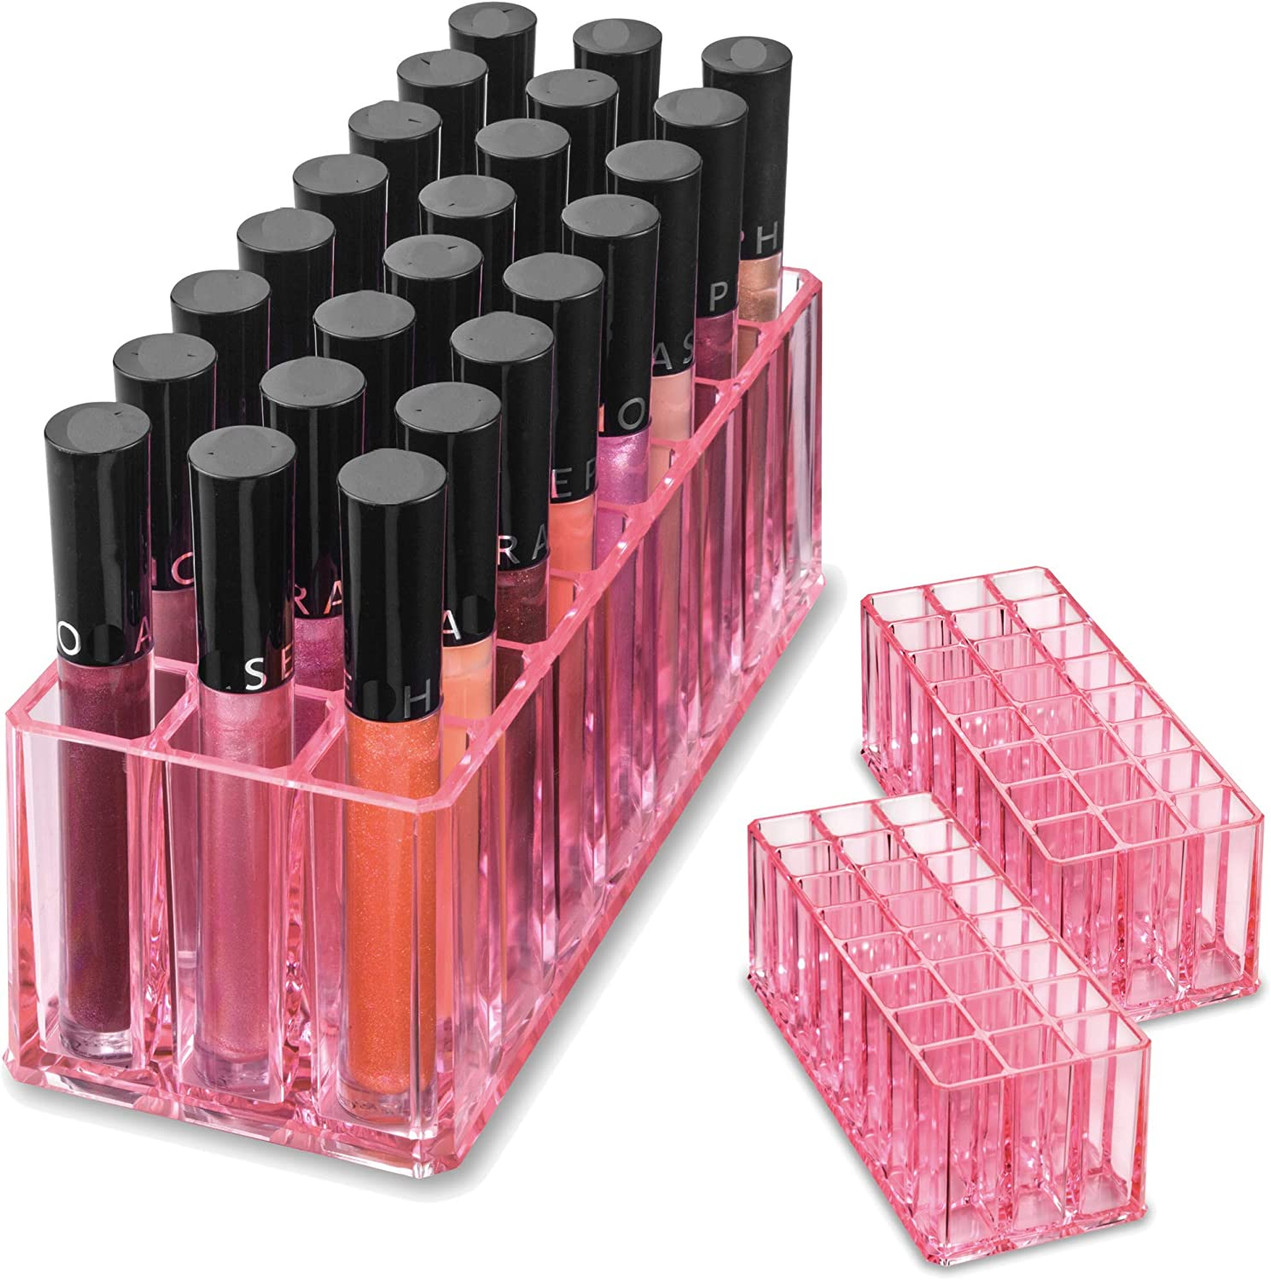 byAlegory Acrylic Lip Gloss Organizer & Beauty Makeup Holder | 24 Space  Organization Container Storage For Tall Lip Gloss / Lipstick Products -  Clear